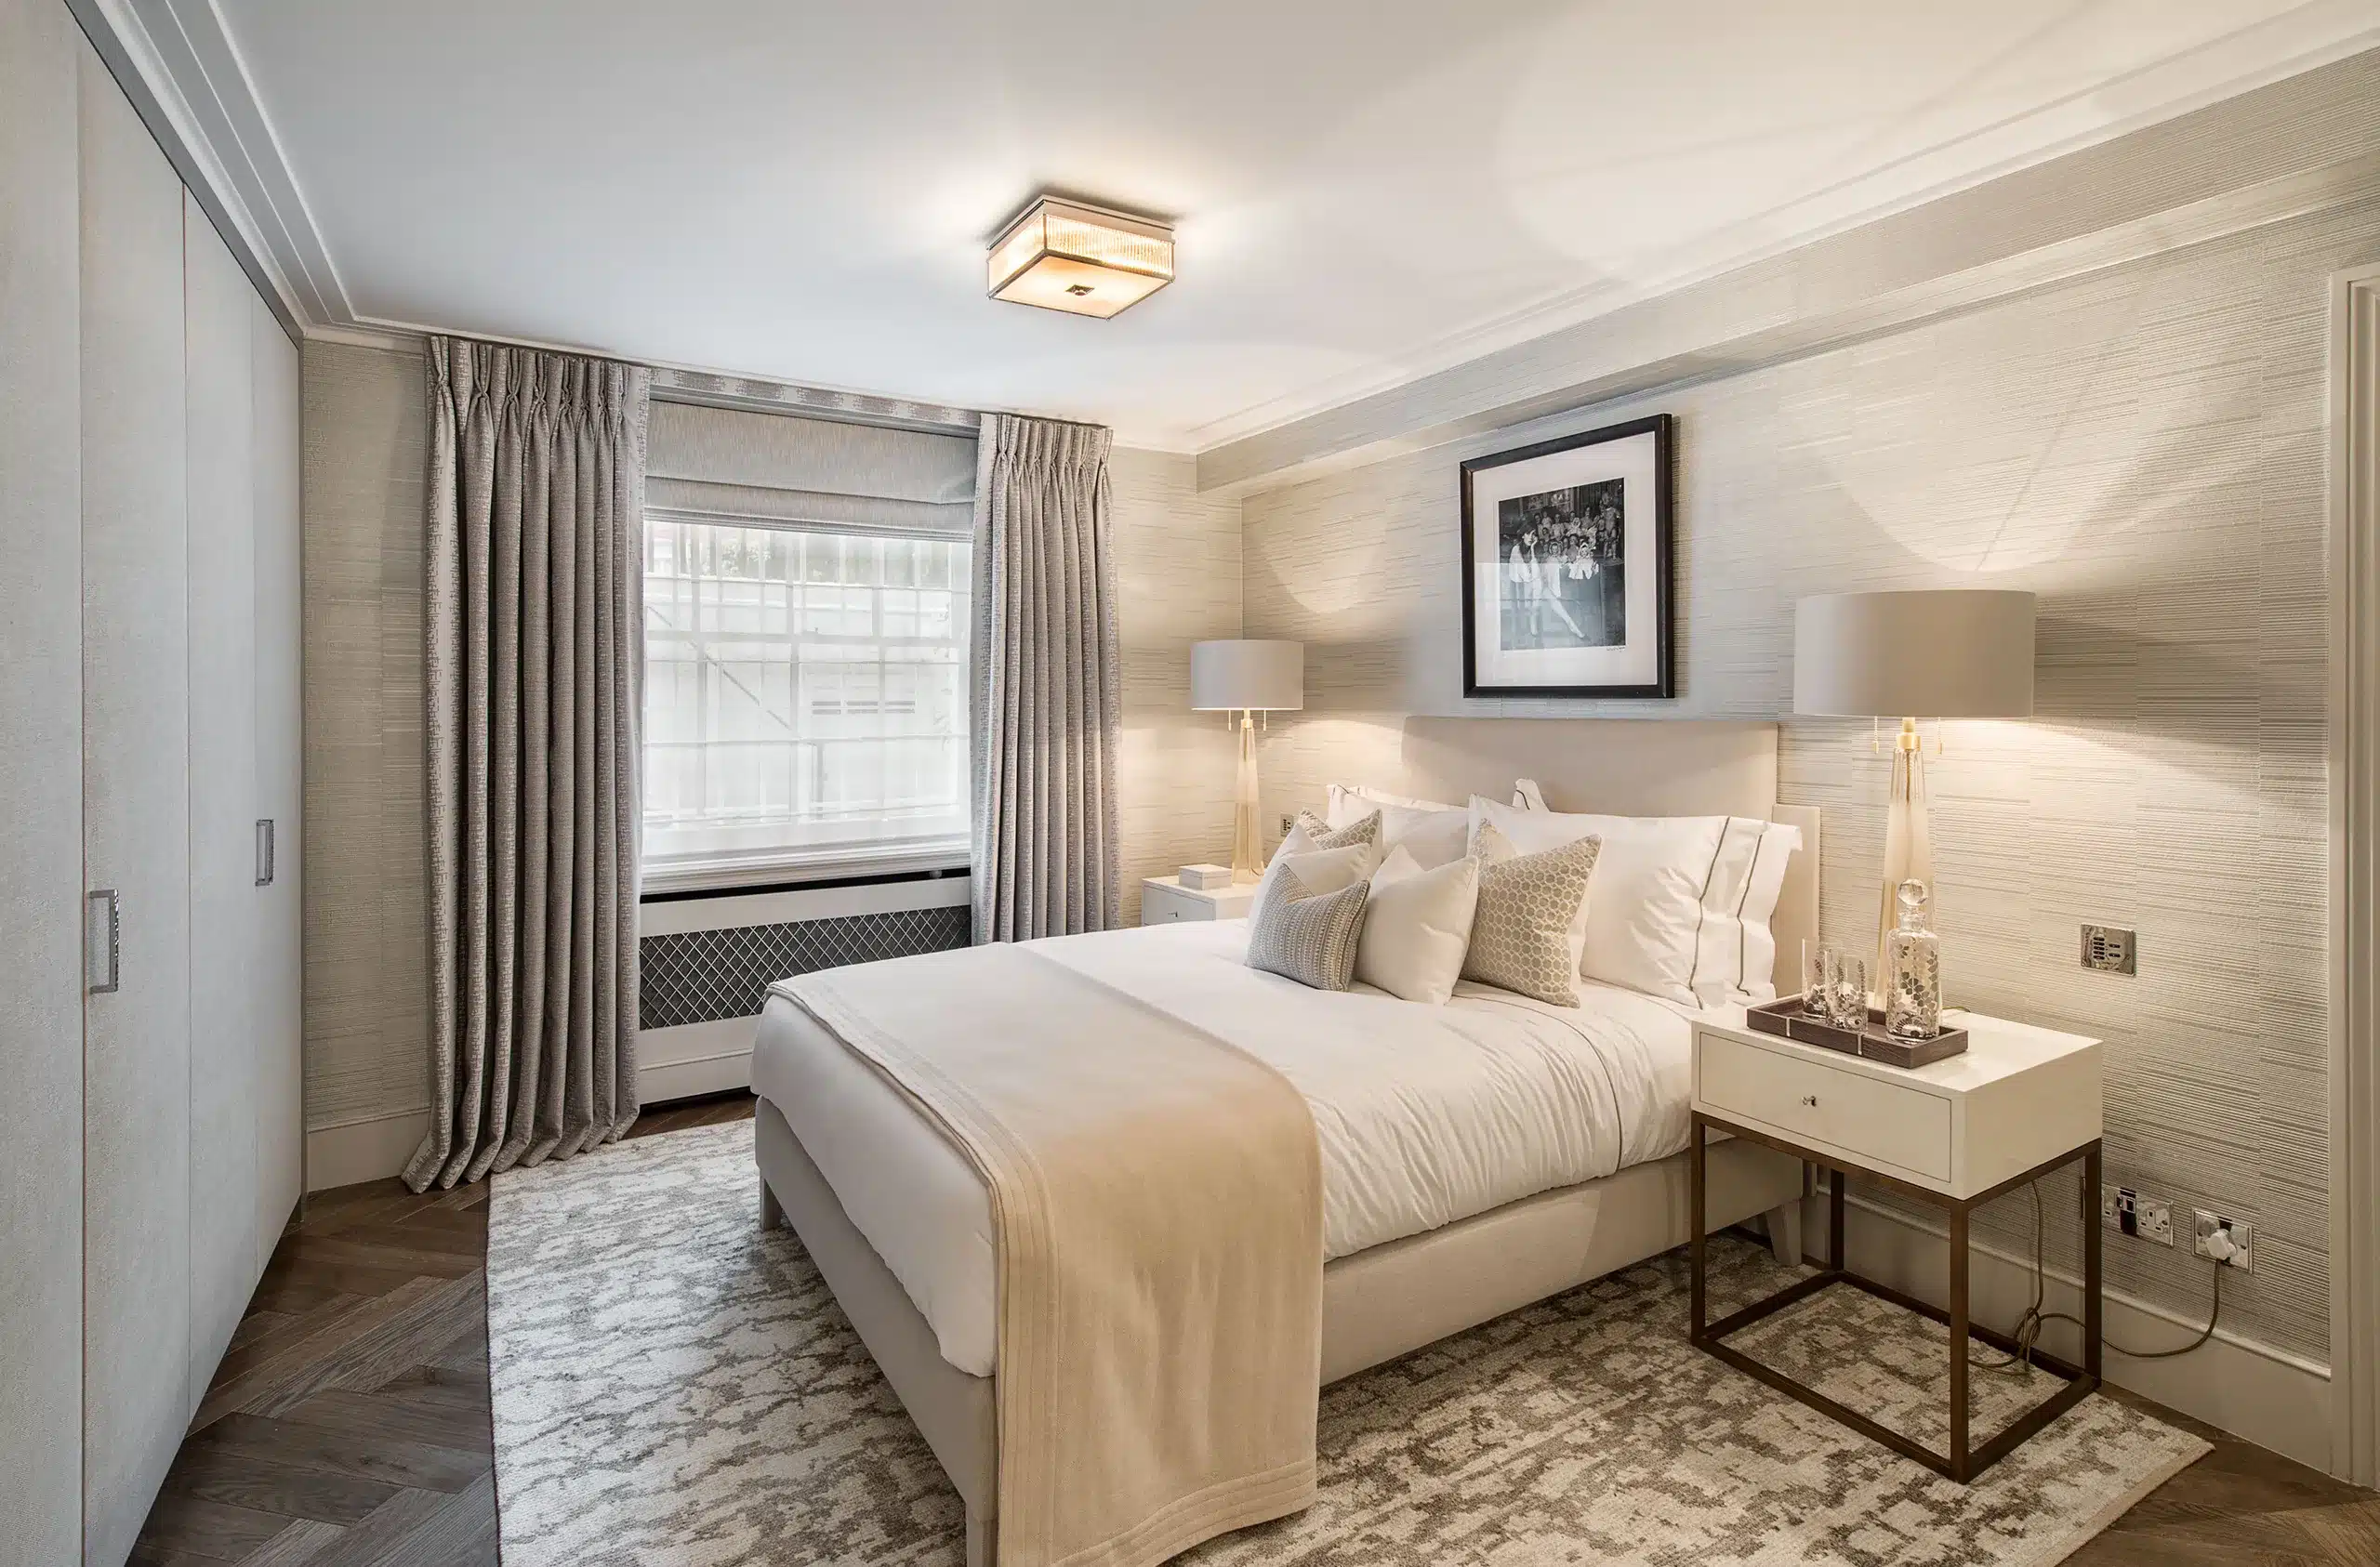 A luxury master bedroom done in contemporary neutral tones